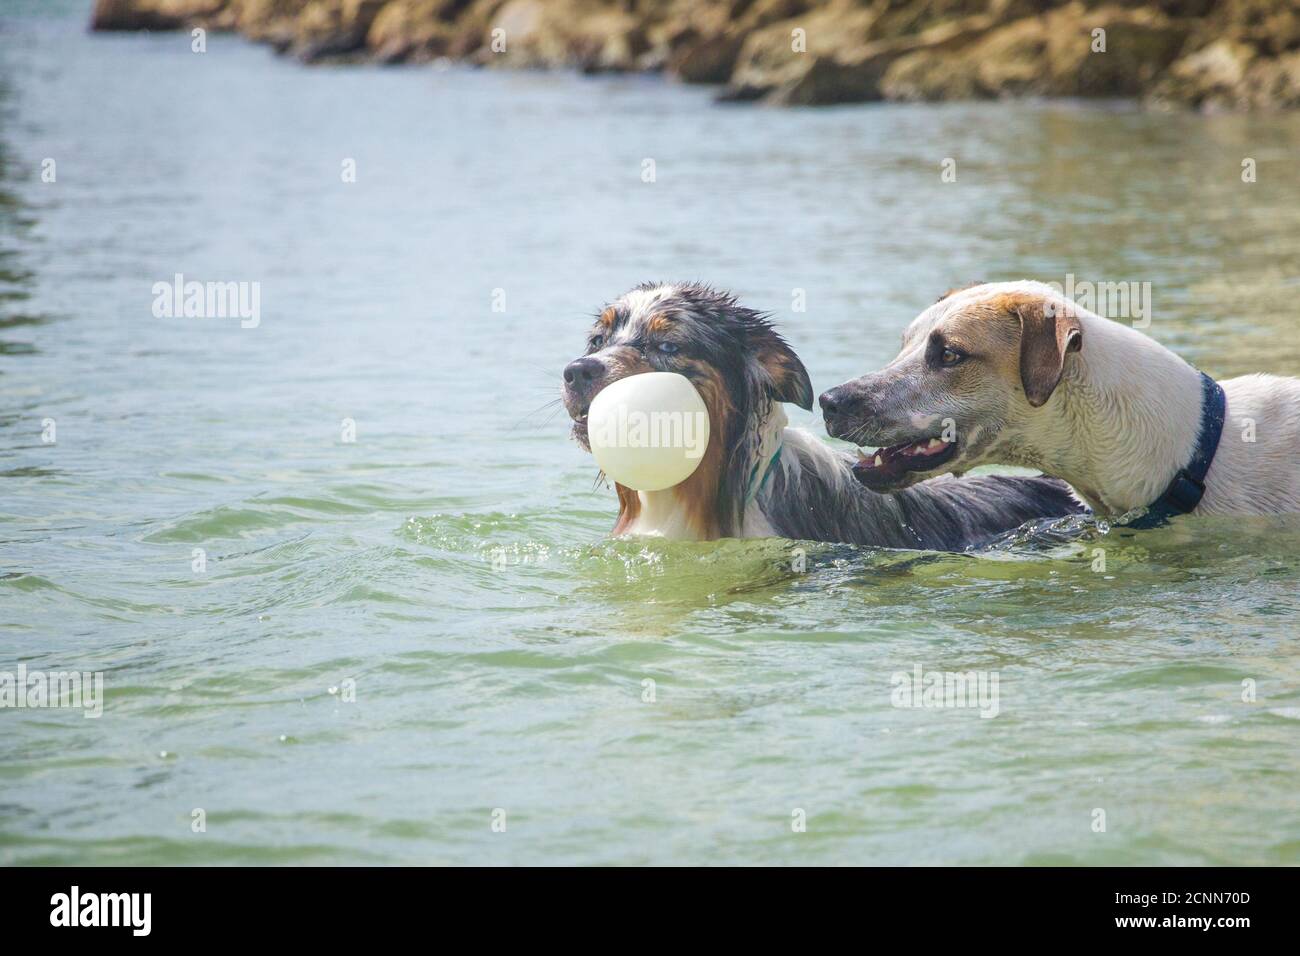 Two dogs playing with a ball in ocean, Florida, USA Stock Photo